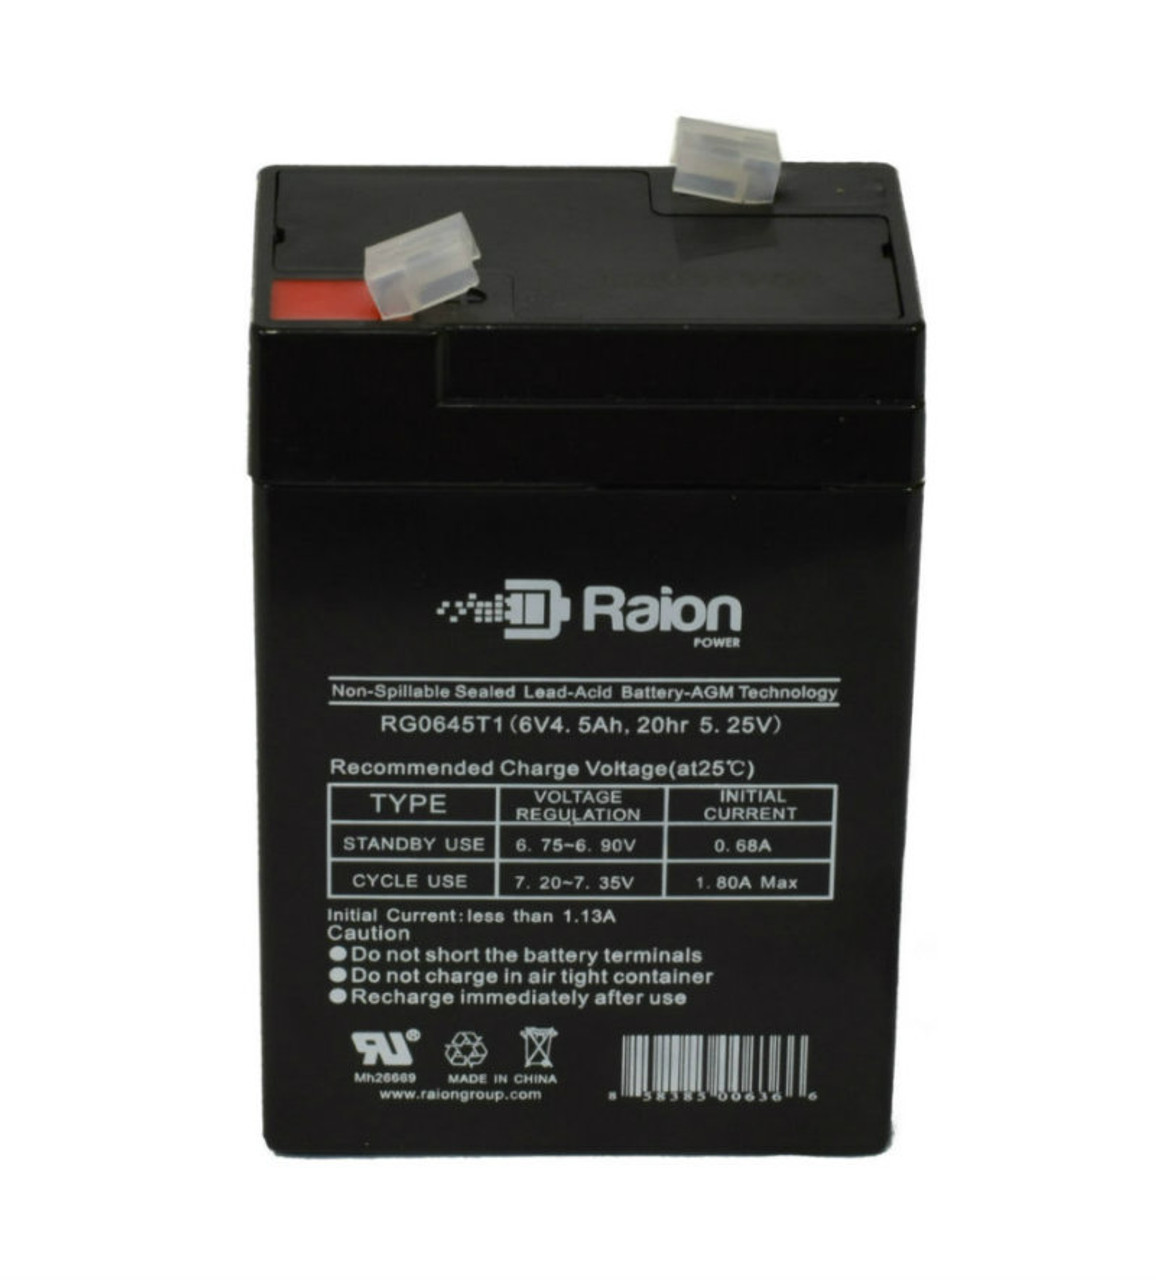 Raion Power RG0645T1 Replacement Battery Cartridge for Alaris Medical 4510 Vital Check Monitor